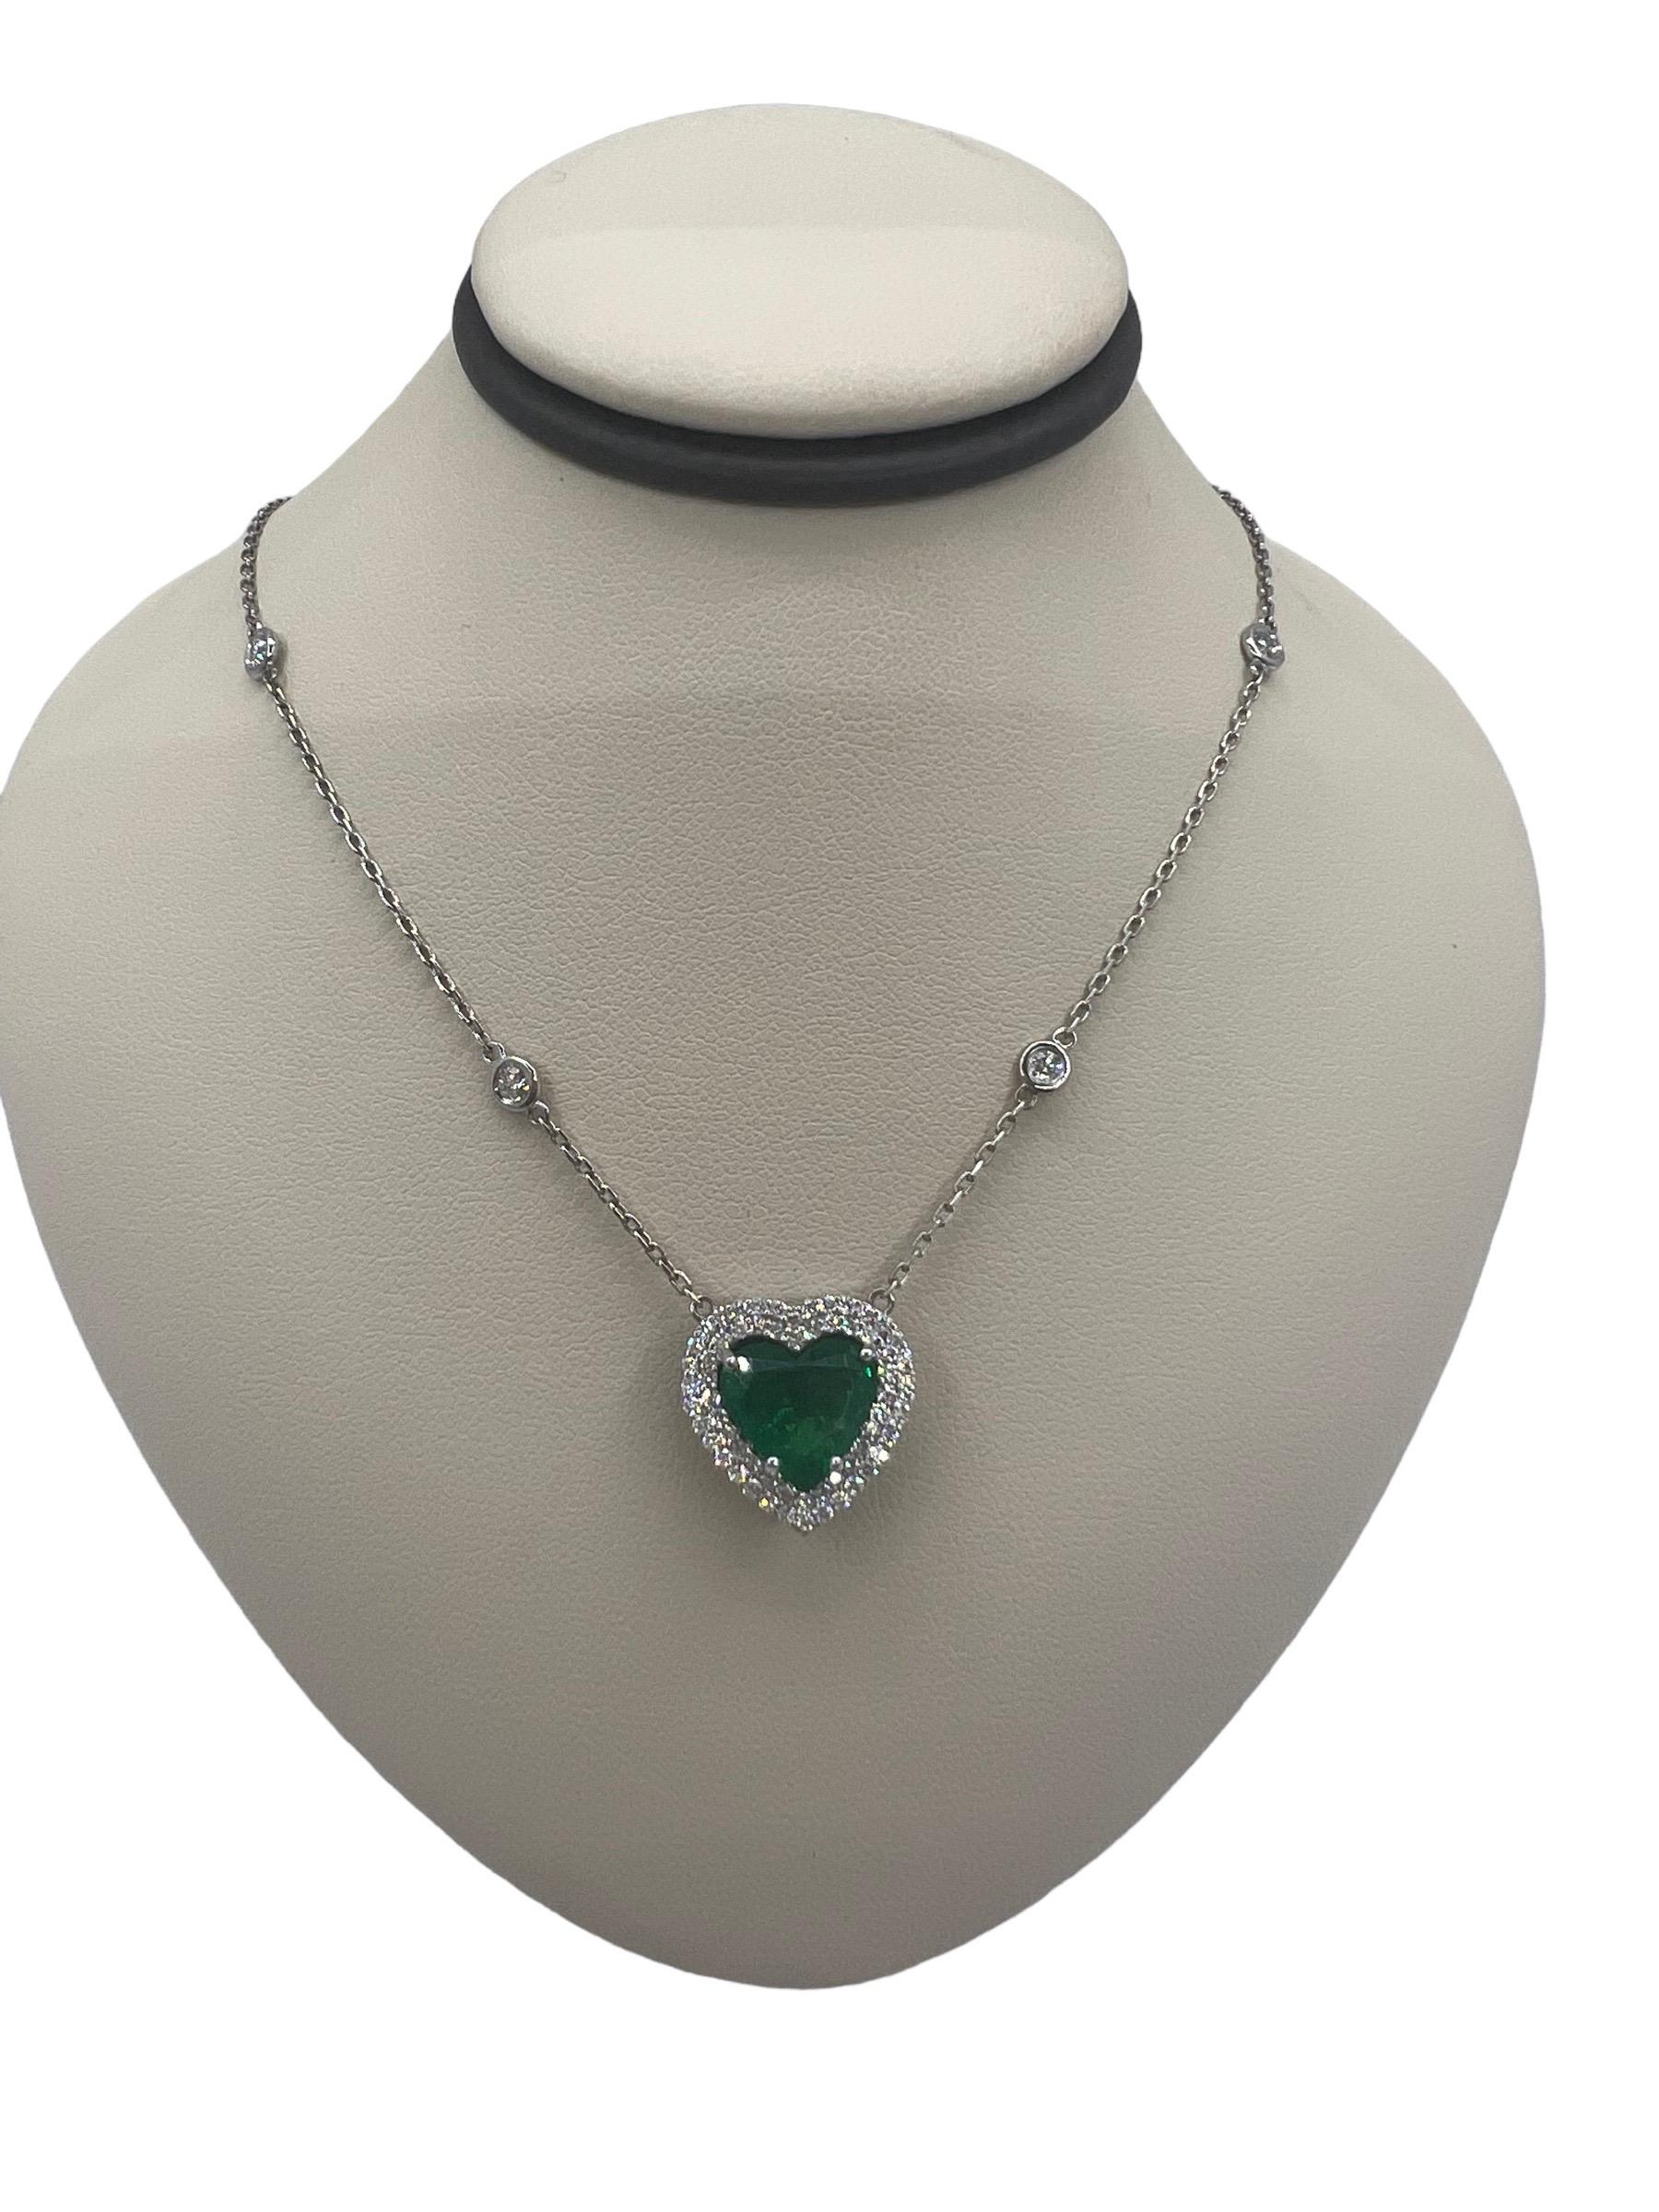 GIA Emerald Heart with Diamond Halo on Diamonds by the Yard White Gold Necklace In New Condition For Sale In Boca Raton, FL